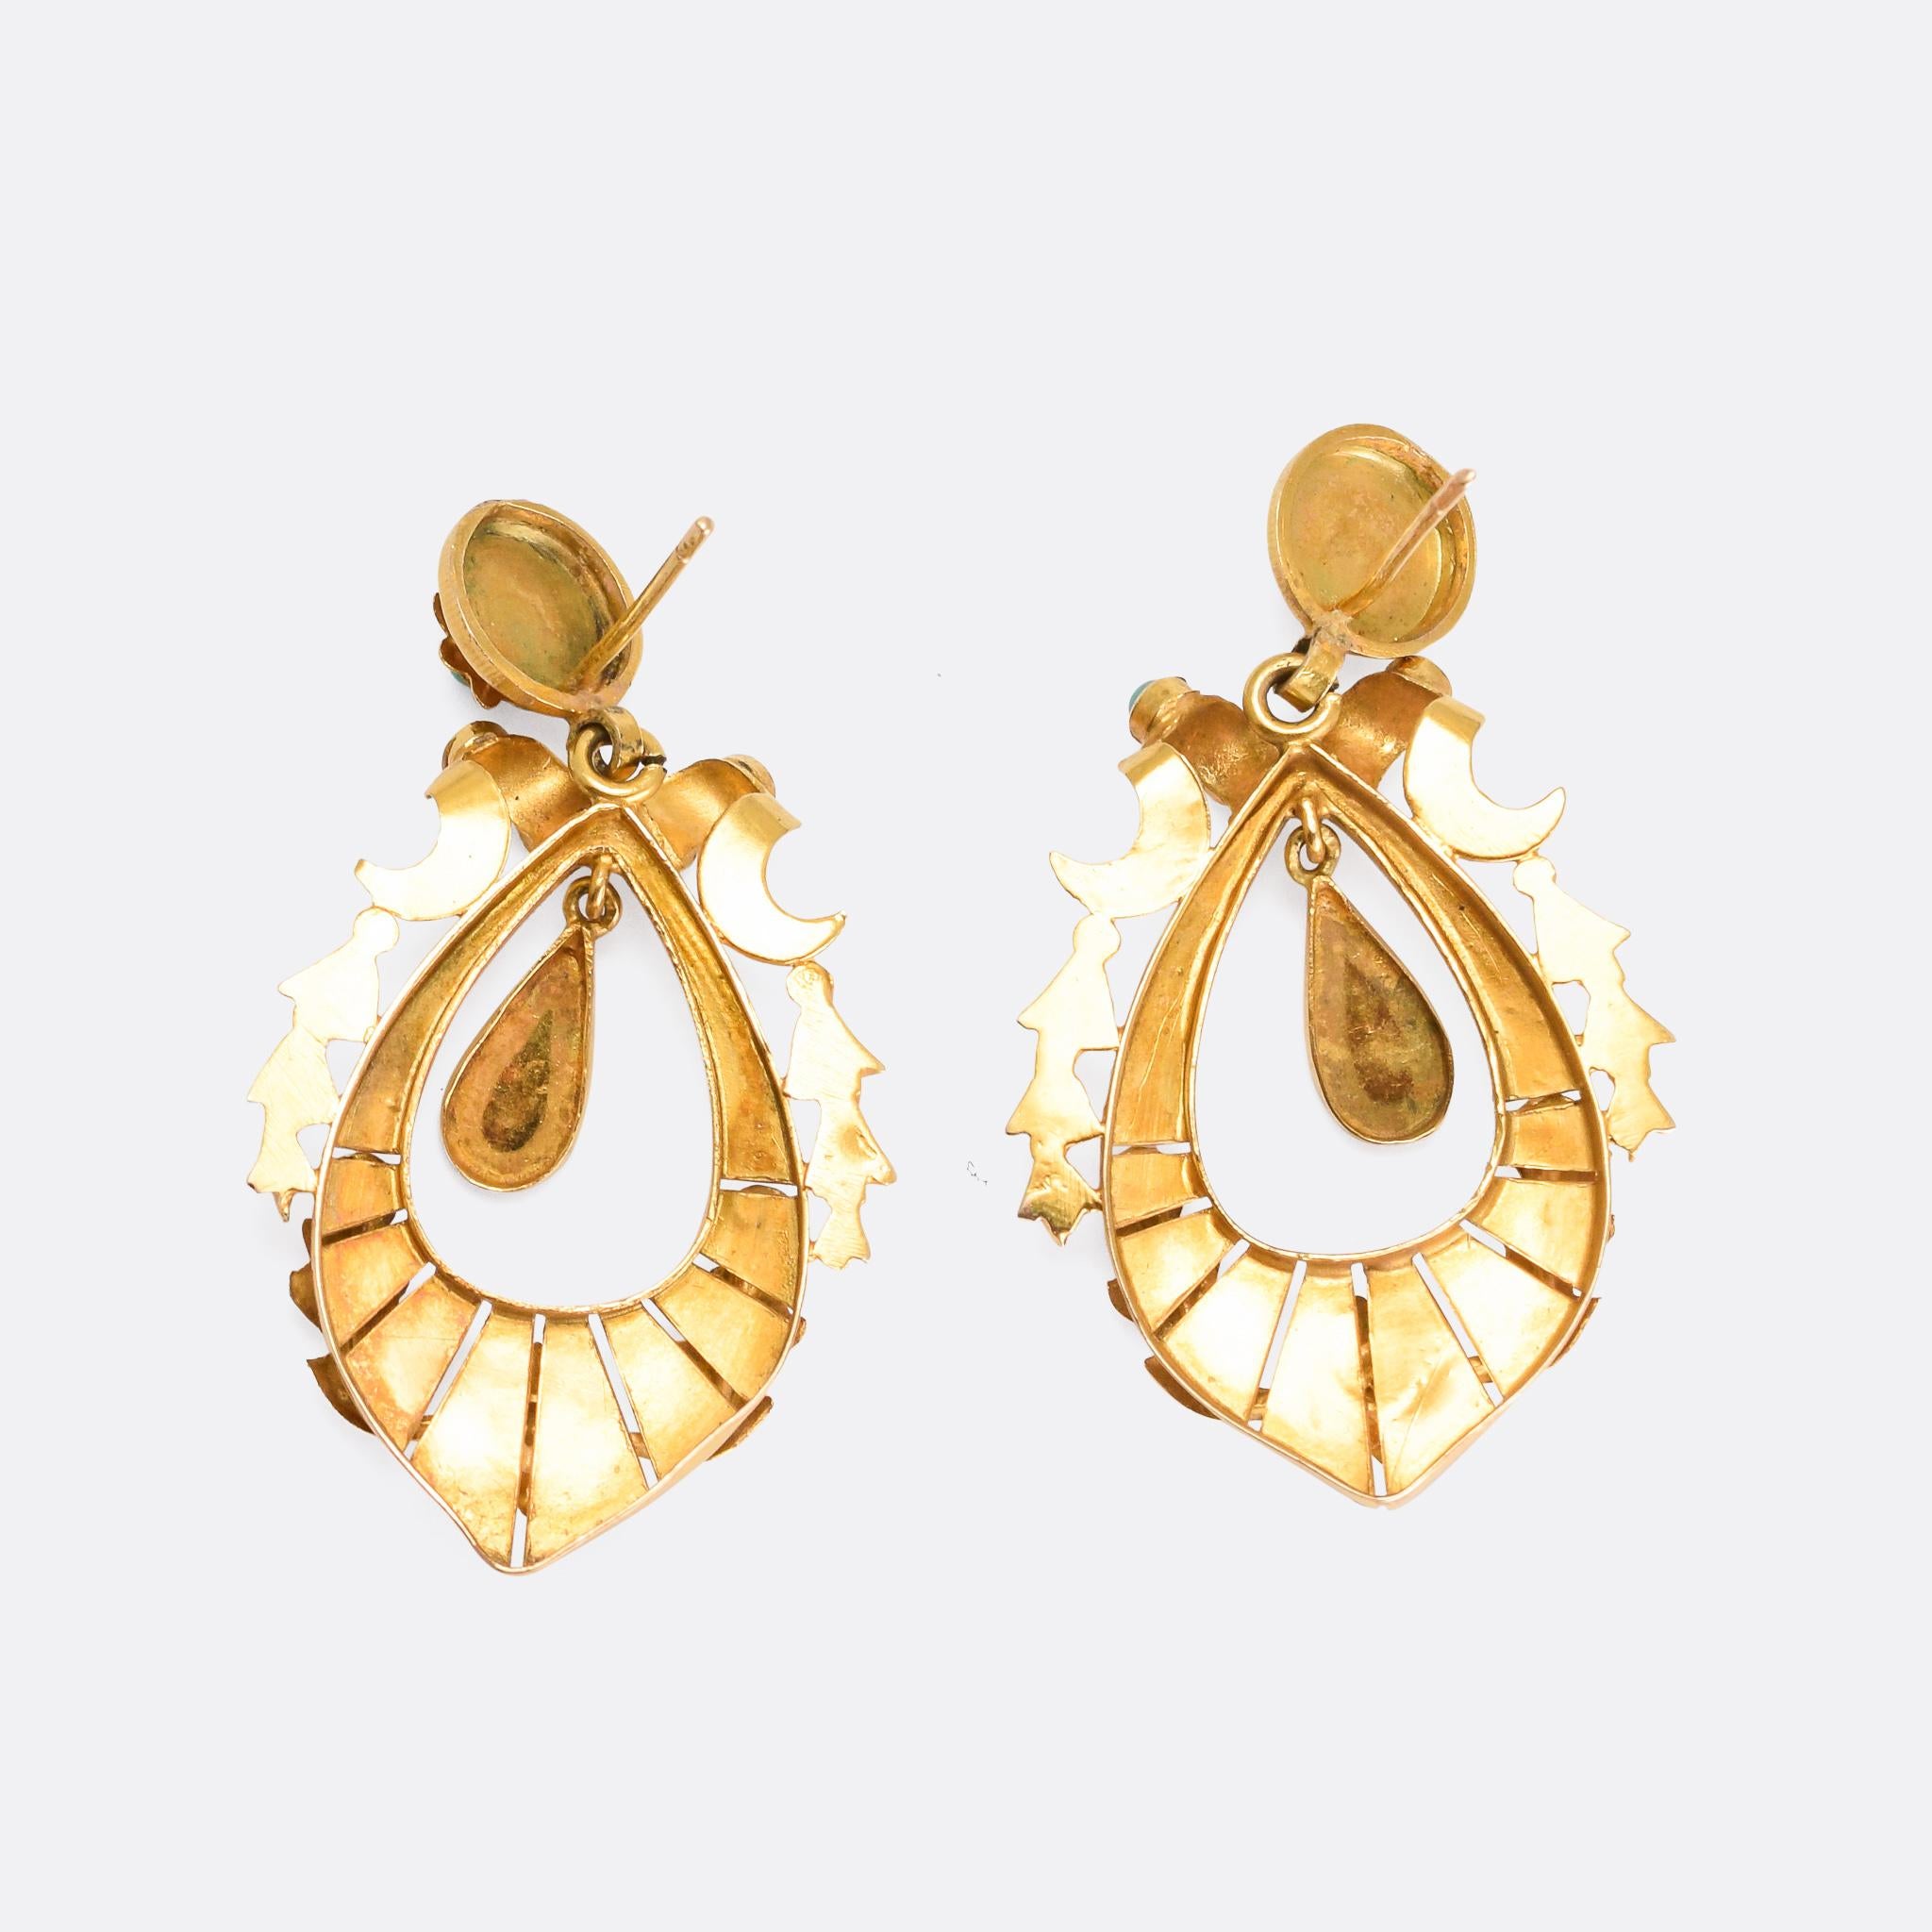 An exceptional pair of antique earrings dating from the mid-Victorian era, circa 1860. They're modelled in 15 karat gold and set with turquoise cabochons; featuring crescent moon, star, and oak leaf motifs, along with further foliate style